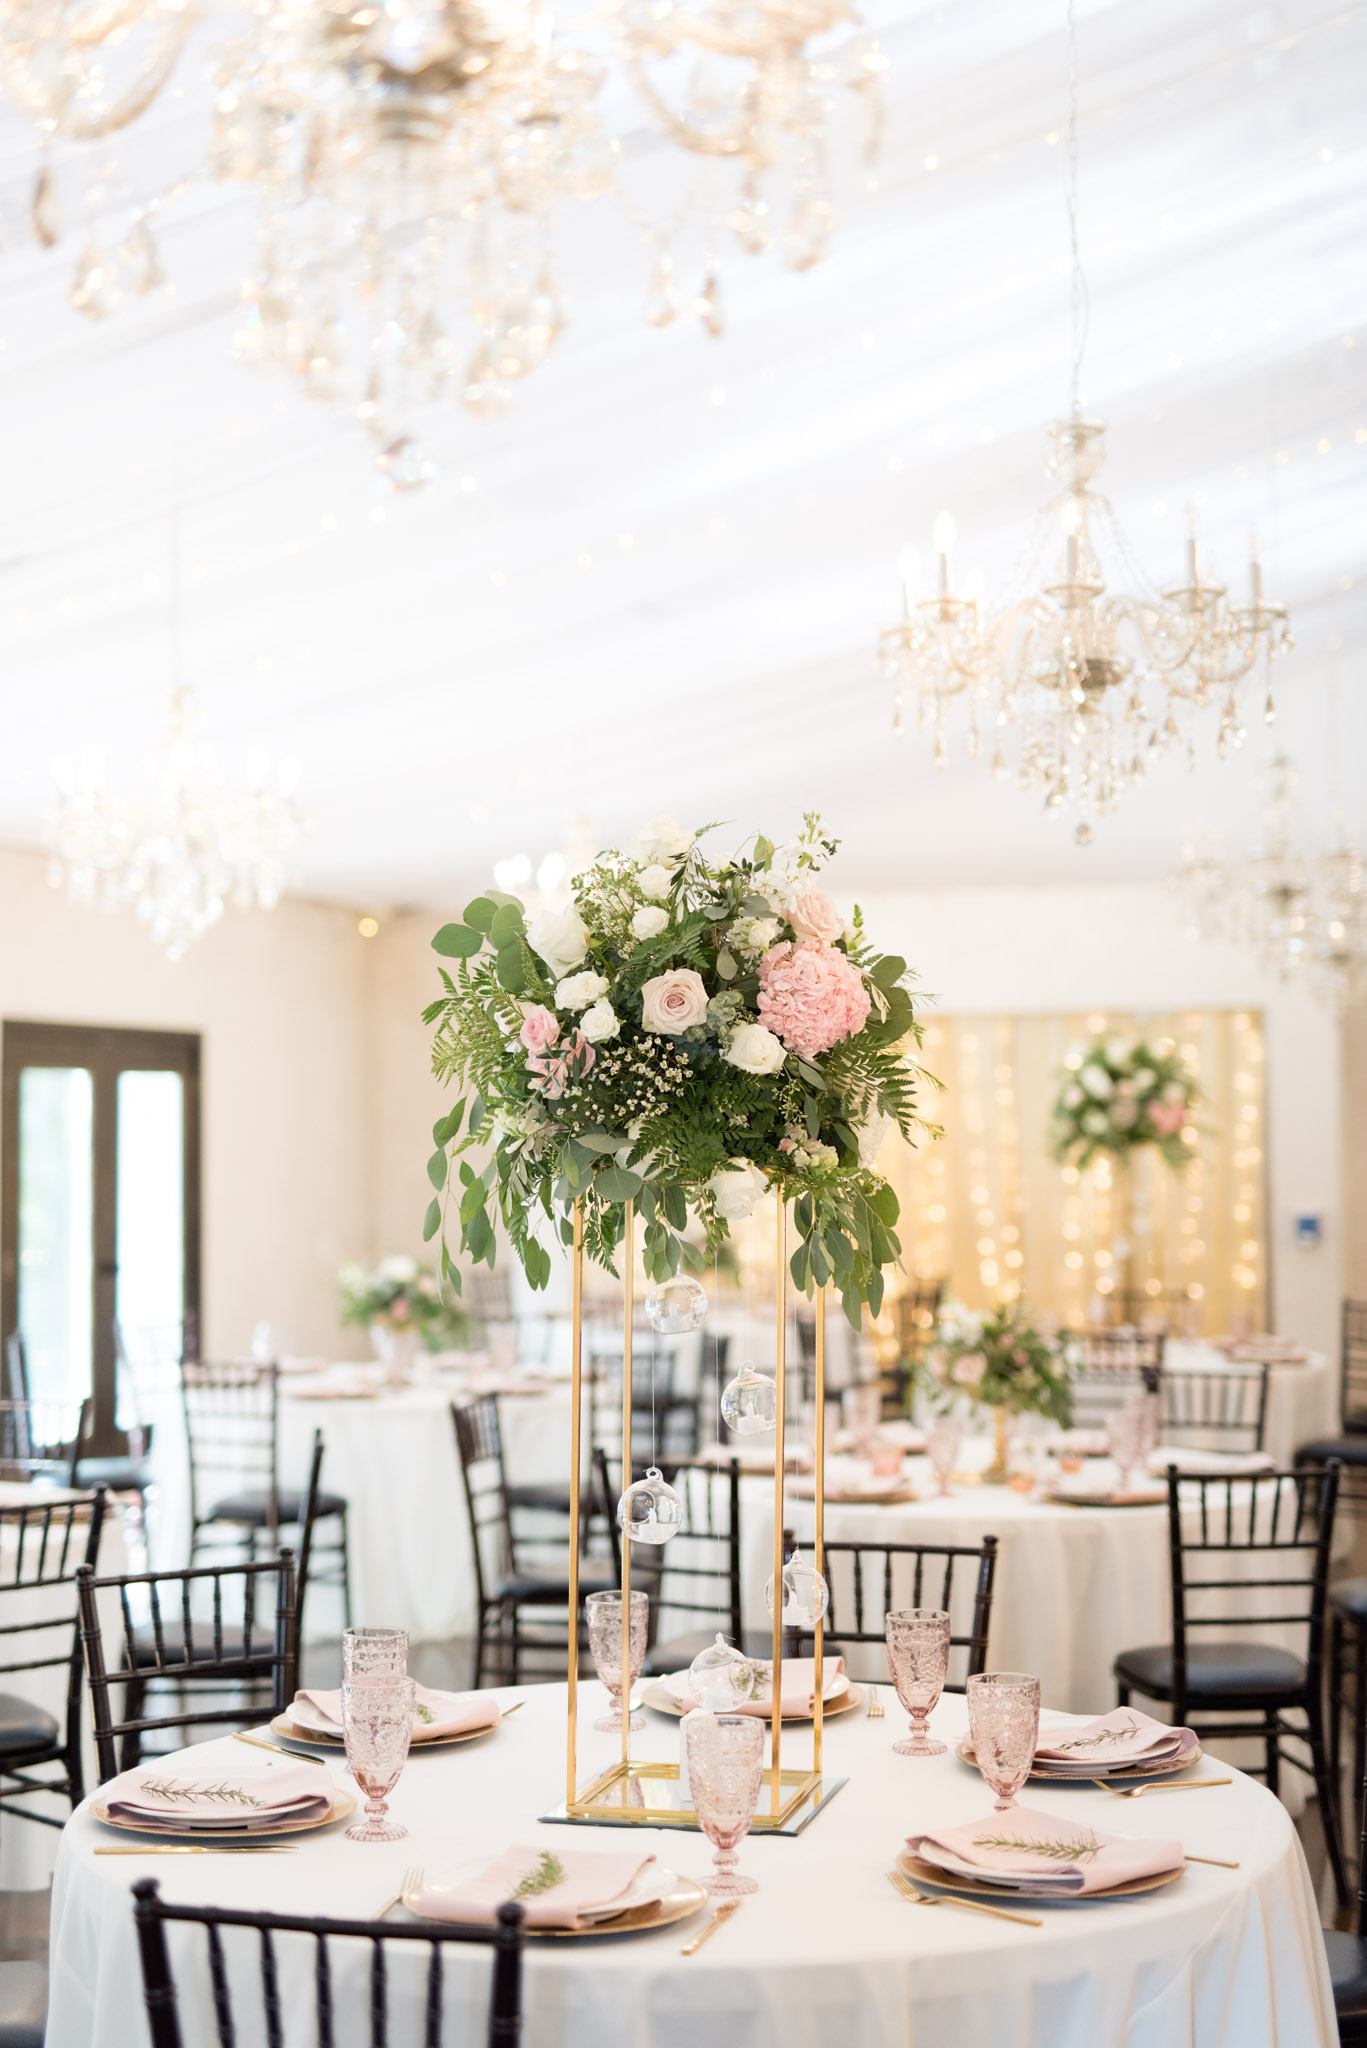 Pink and white florals at wedding reception.